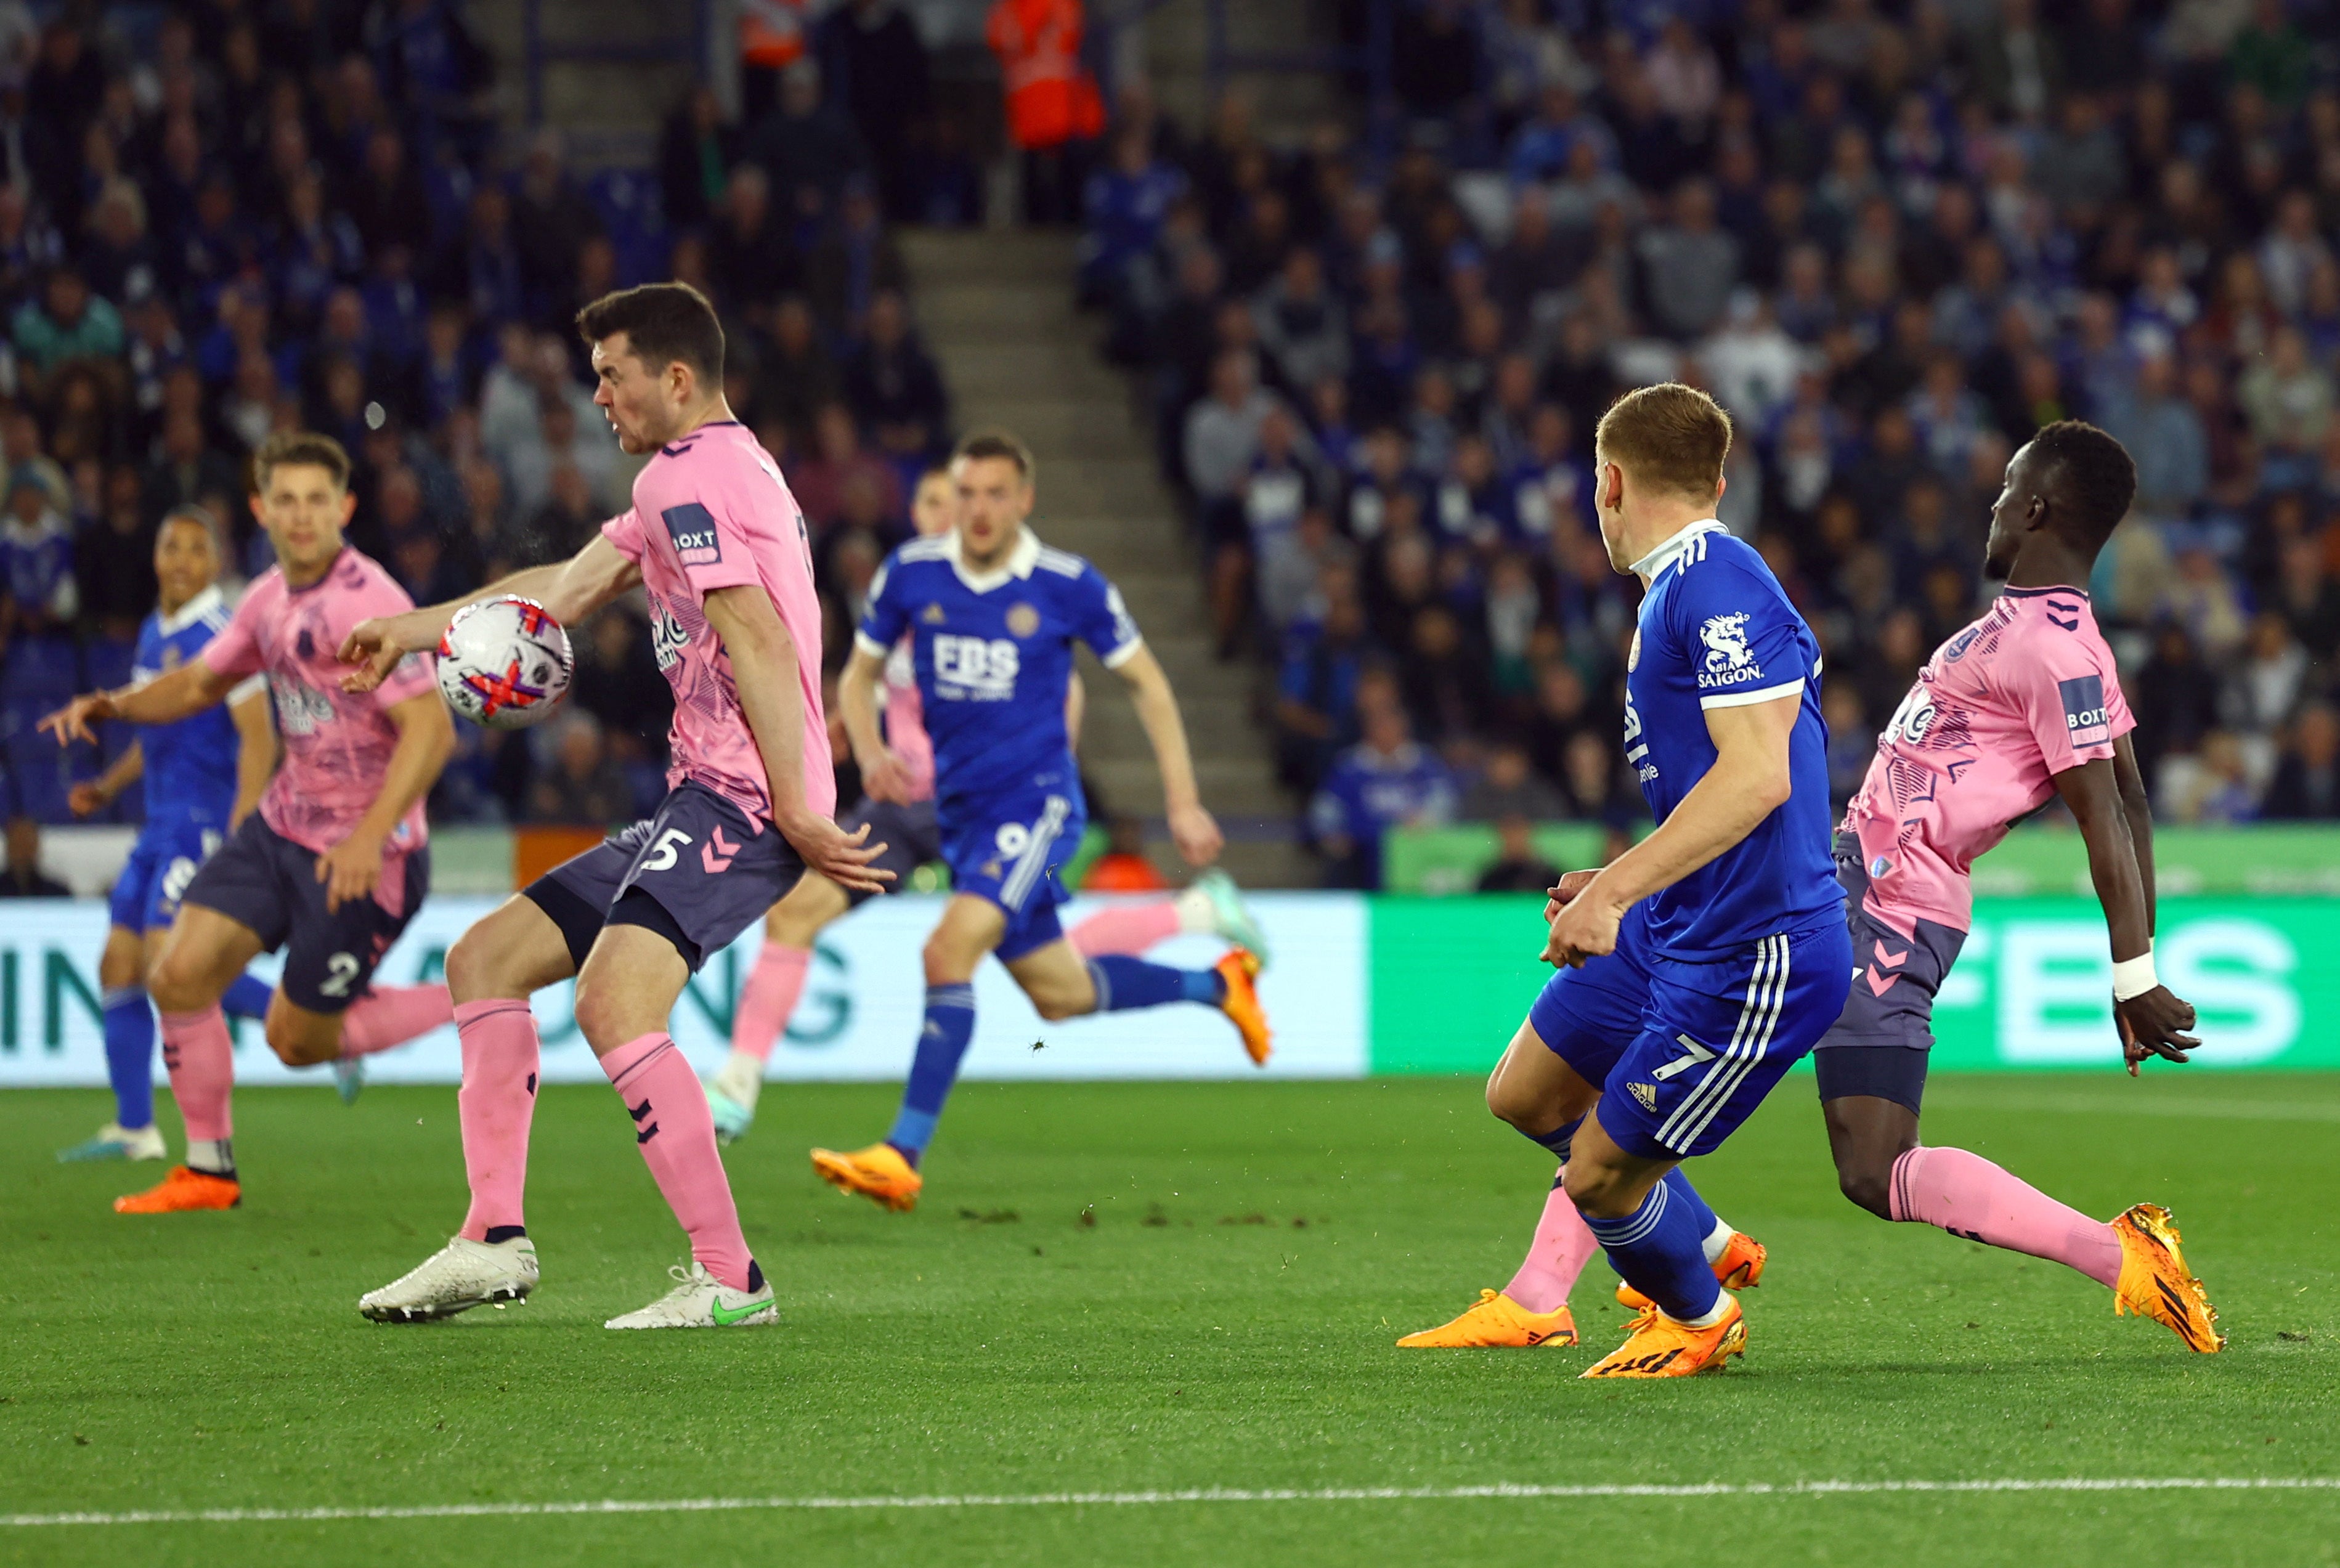 Everton defender Michael Keane handles the ball to concede a penalty